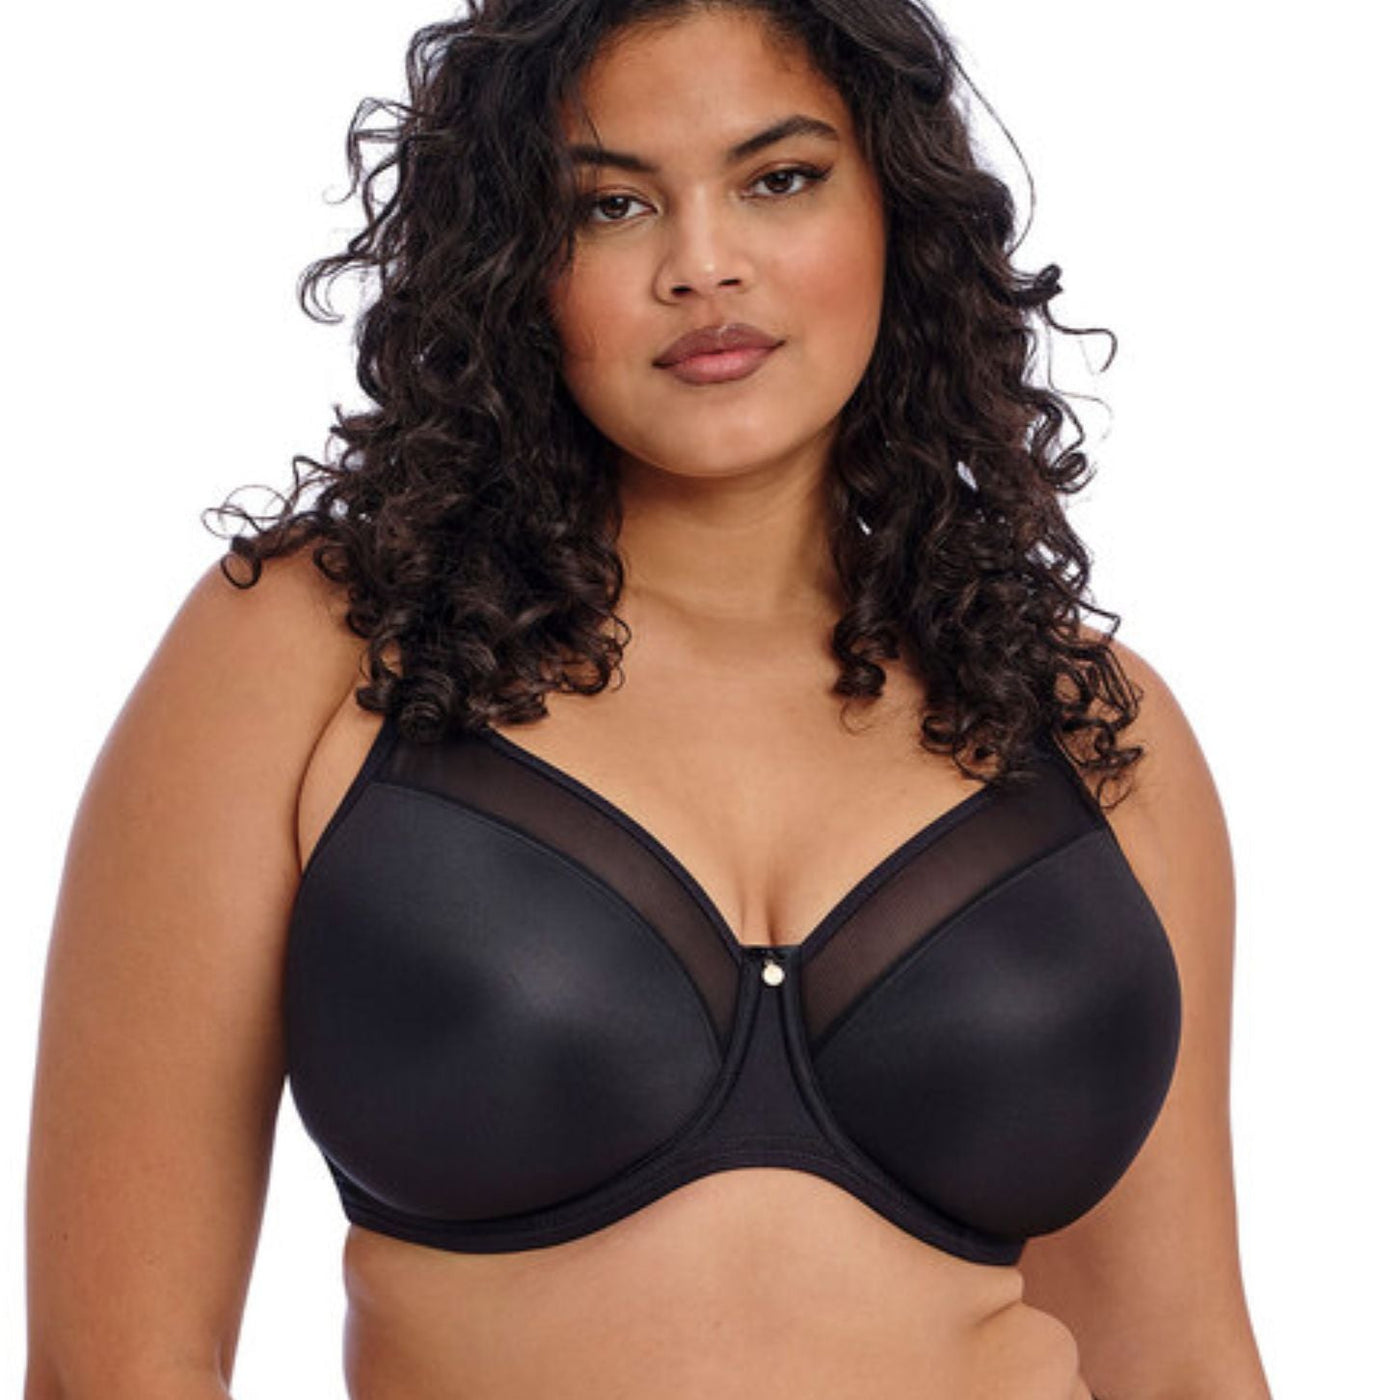 Elomi Smooth Moulded Bra in Black EL4301-Bras-Elomi-Black-38-E-Anna Bella Fine Lingerie, Reveal Your Most Gorgeous Self!